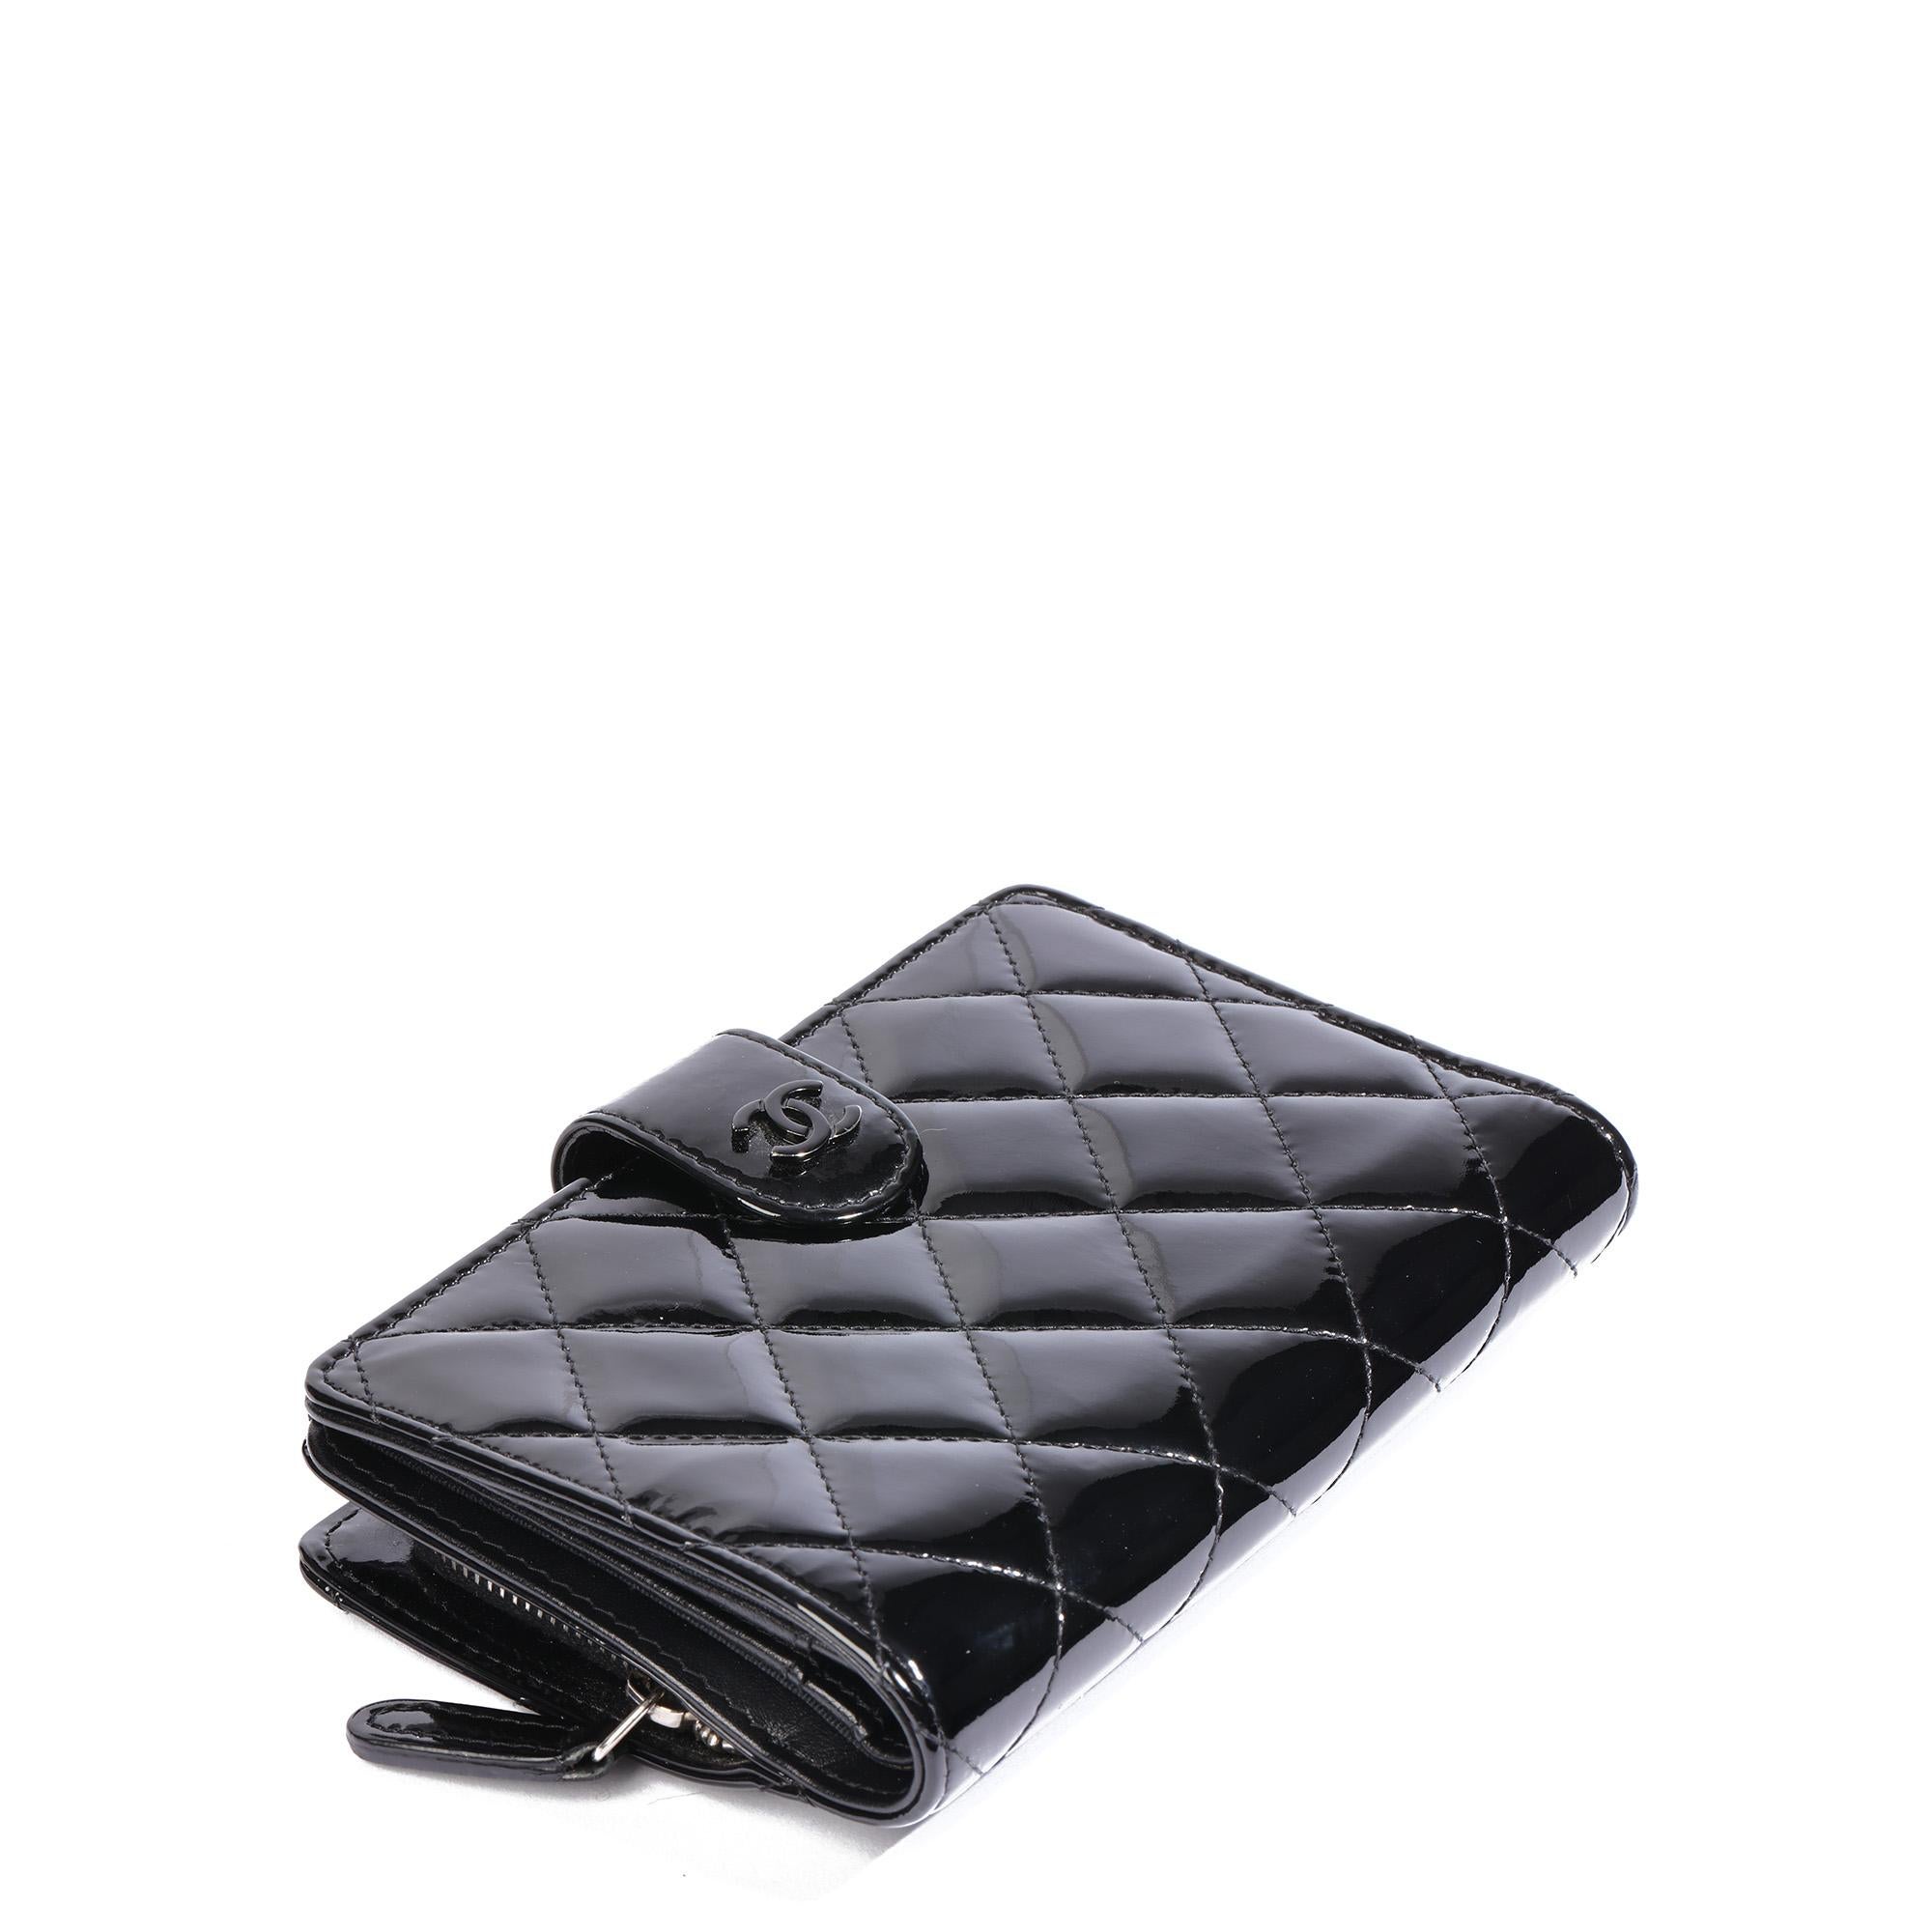 Chanel BLACK QUILTED PATENT LEATHER ZIP POCKET WALLET

CONDITION NOTES
The exterior is in very good condition with minimal signs of use.
The interior is in very good condition with light signs of use.
The hardware is in good condition with light